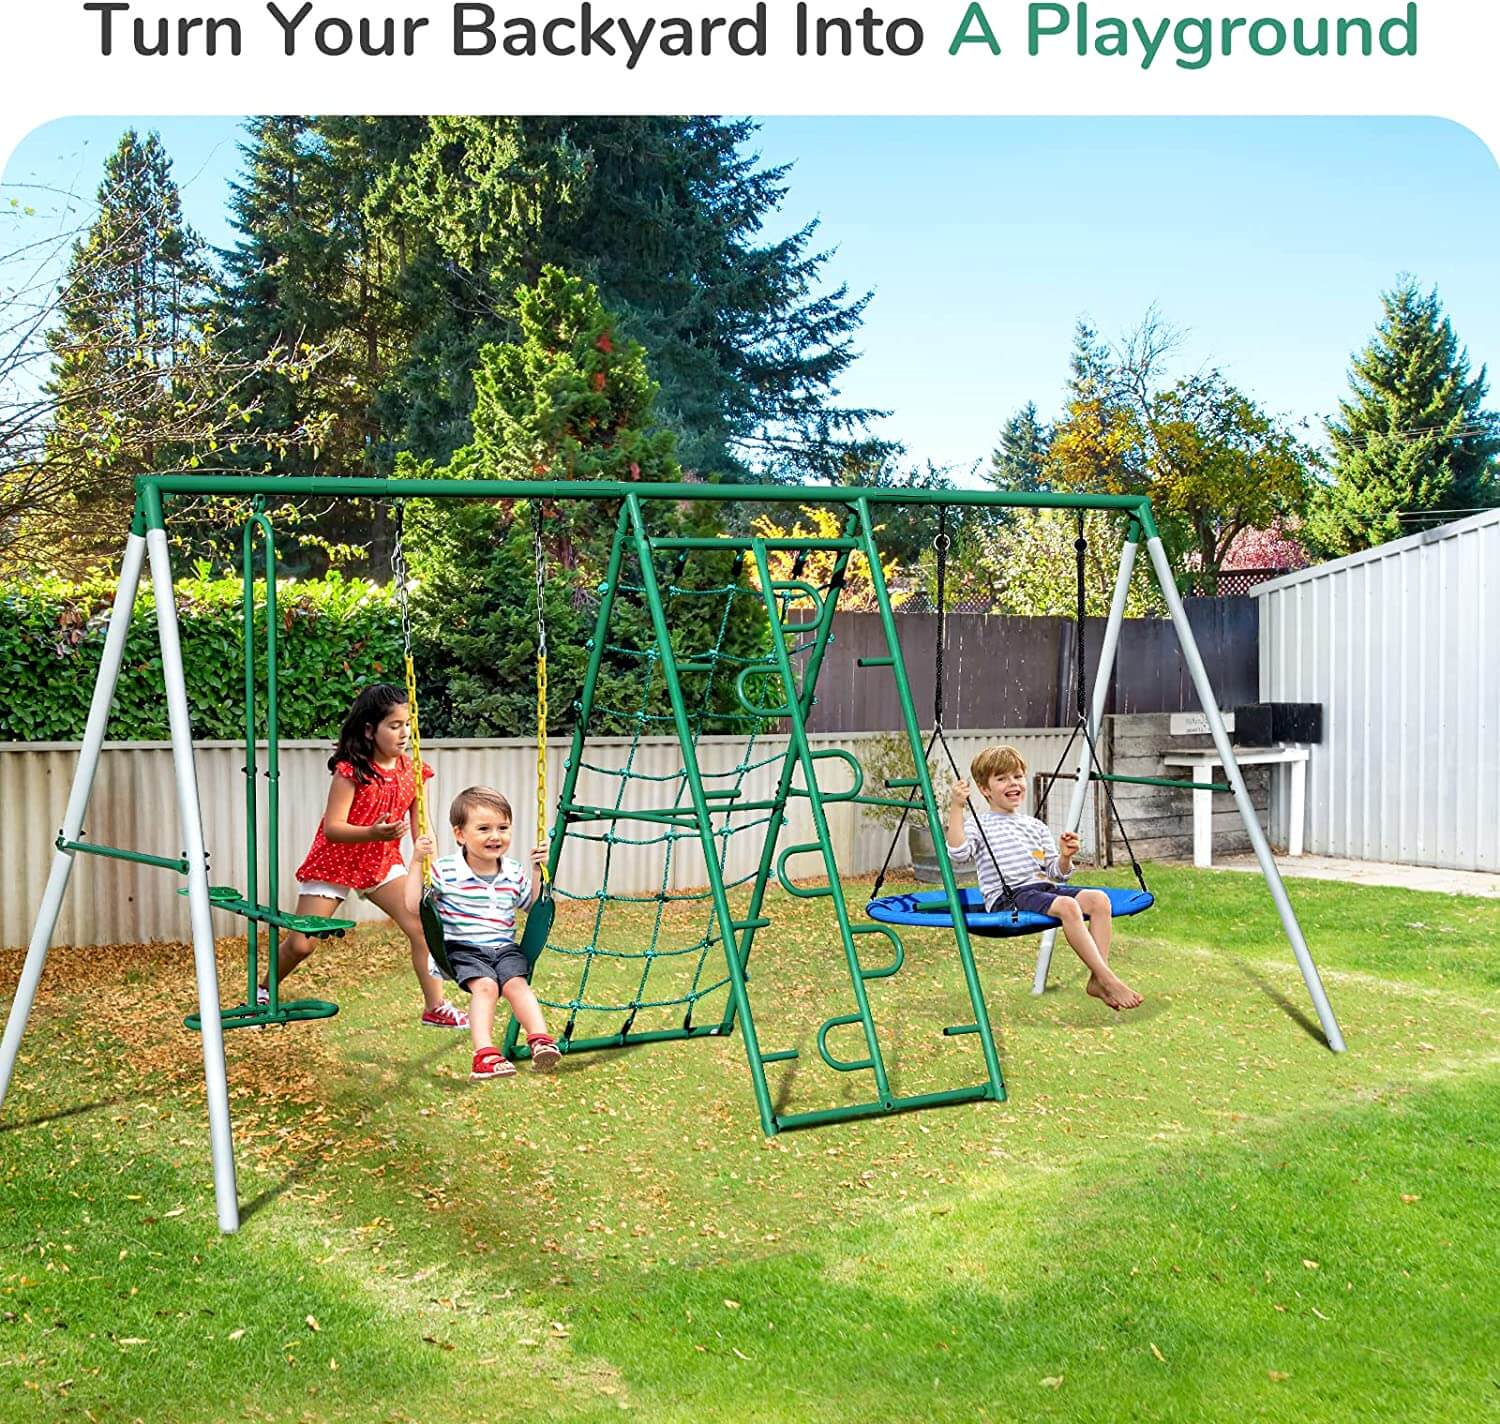 Swing Sets for Backyard with Saucer Swing,Belt Swing,Glider,Climbing Rope,Climbing Ladder